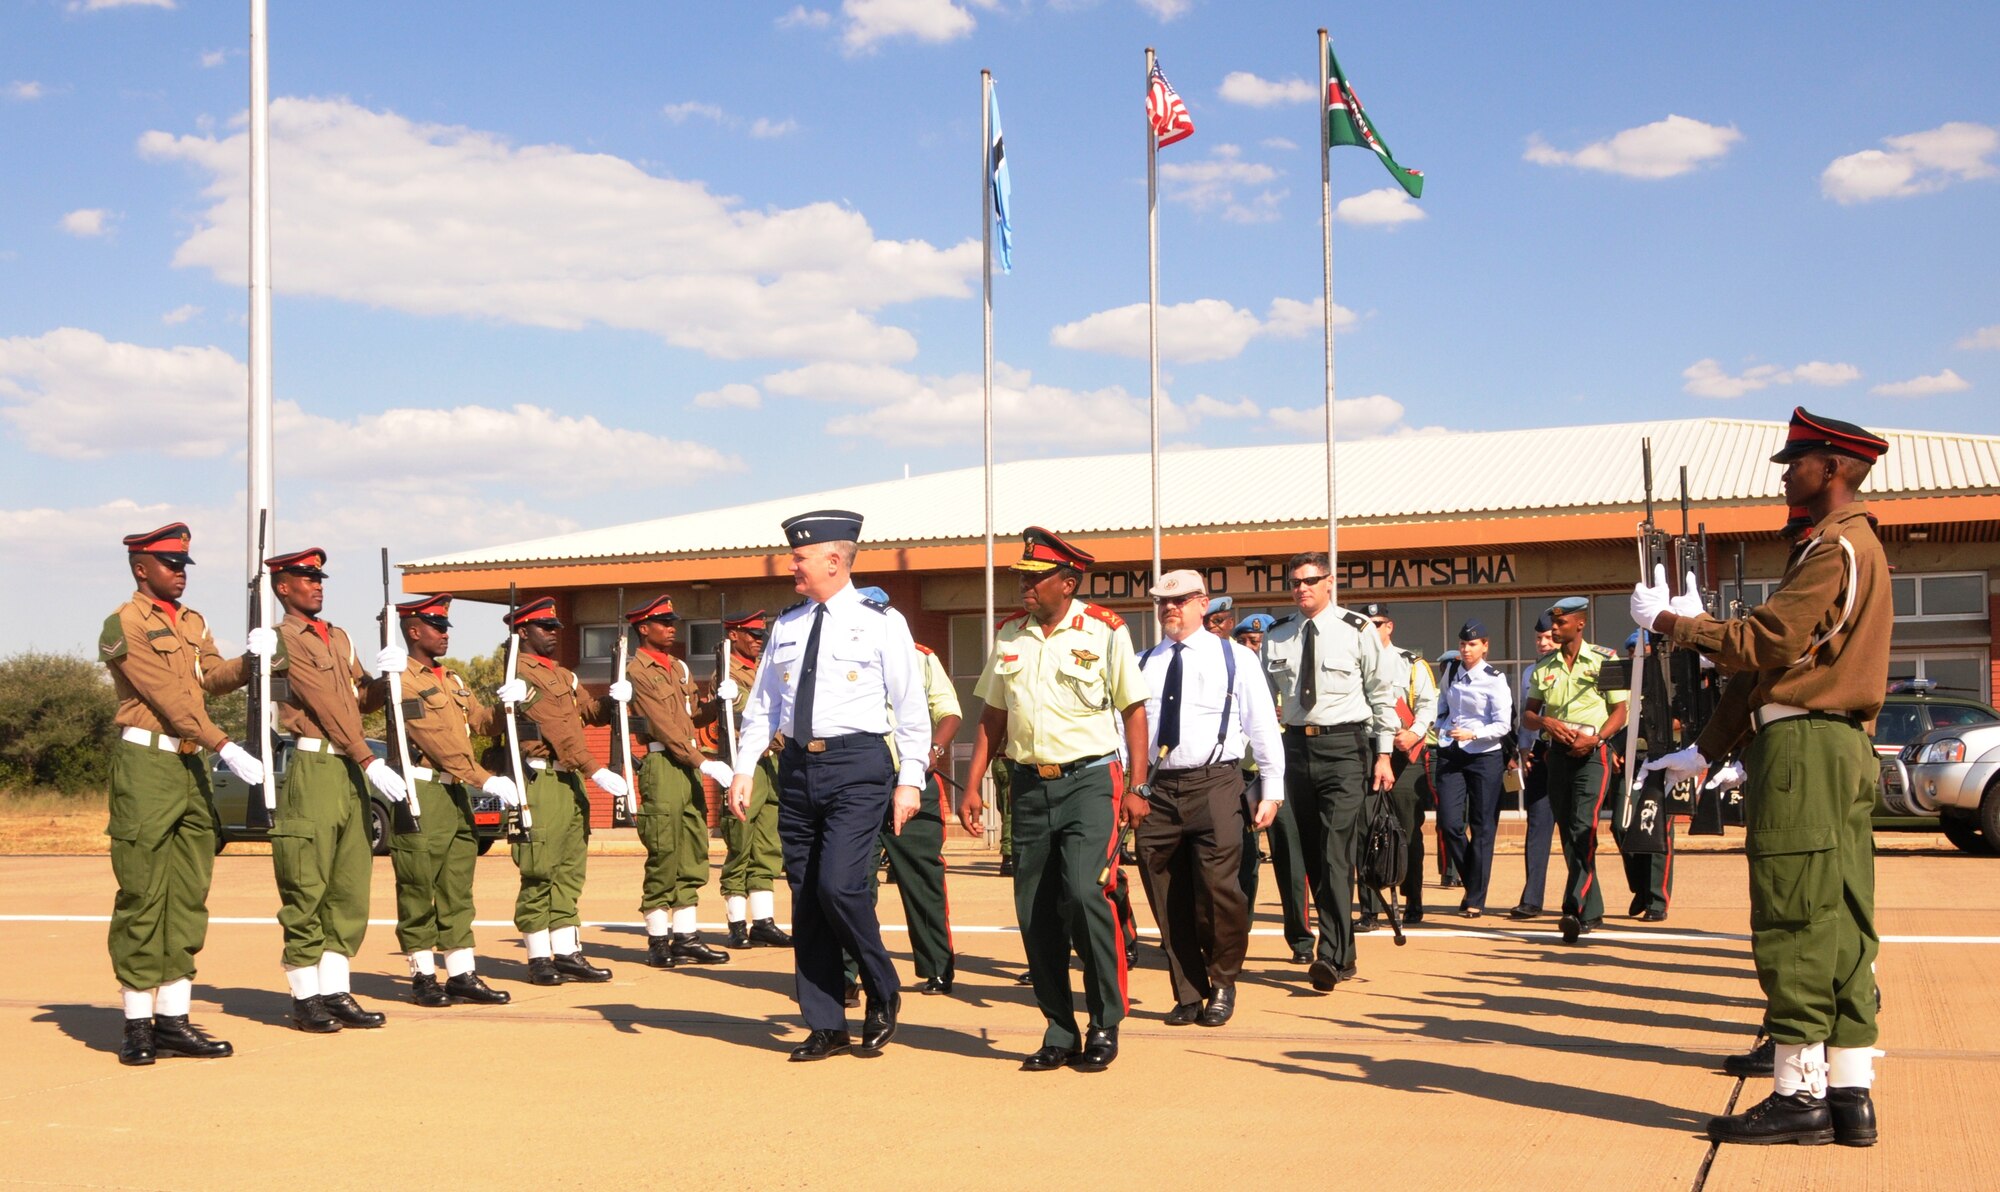 GABORONE, Botswana – Maj. Gens. Ronald Ladnier (left), commander of 17th Air Force (Air Forces Africa) and T.M. Paledi, commander of the Air Arm, Botswana Defense Force, prepare to depart Thebephatshwa Air Base March 10 after touring the installation. The two Generals and their staffs discussed the ongoing cooperation between the BDF and AFAFRICA during General Ladnier’s senior leader engagement in the country March 9-11. Following the Generals are AFAFRICA Foreign Policy Advisor Brent Bohne, and Army Lt. Col. Tim Wyatt, U.S. Embassy Office of Security Cooperation. (U.S. Air Force photo by Master Sgt. Jim Fisher)